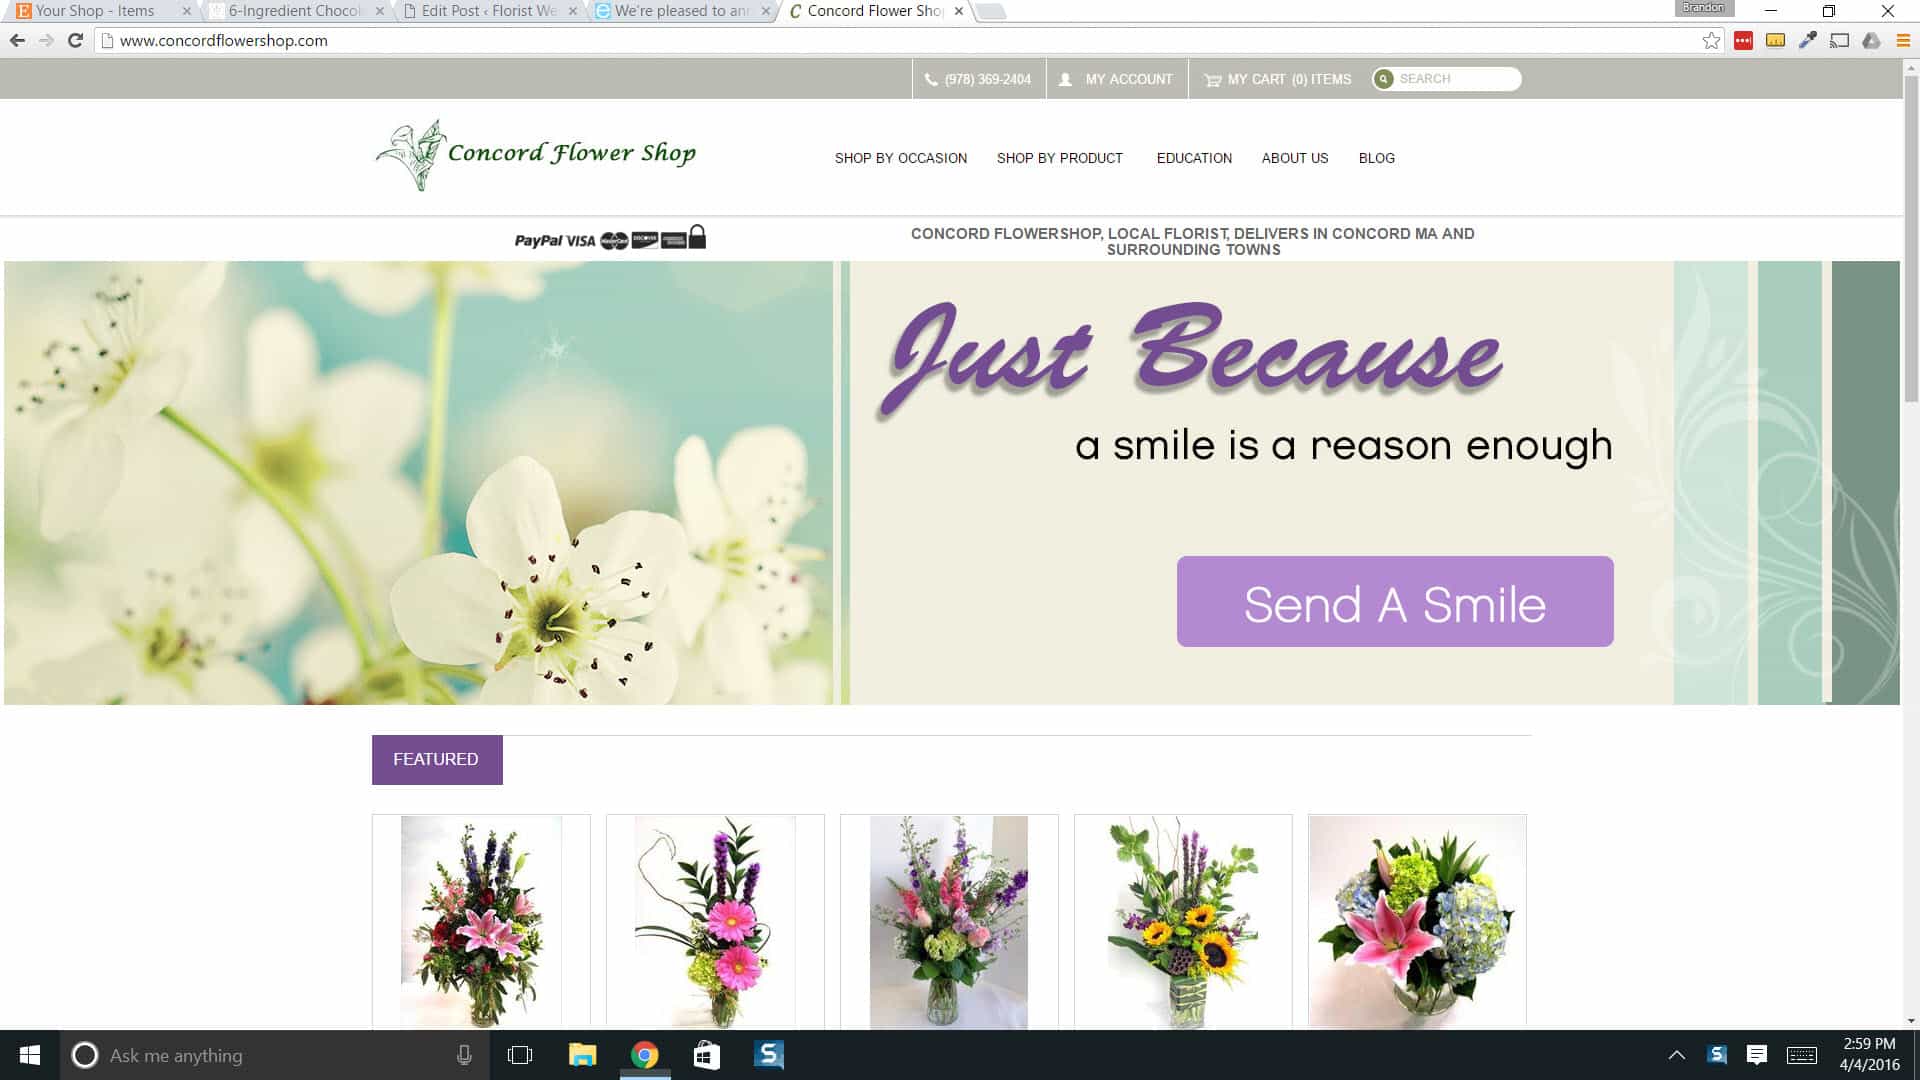 We’re pleased to announce the newest epicFlorist, Concord Flower Shop!